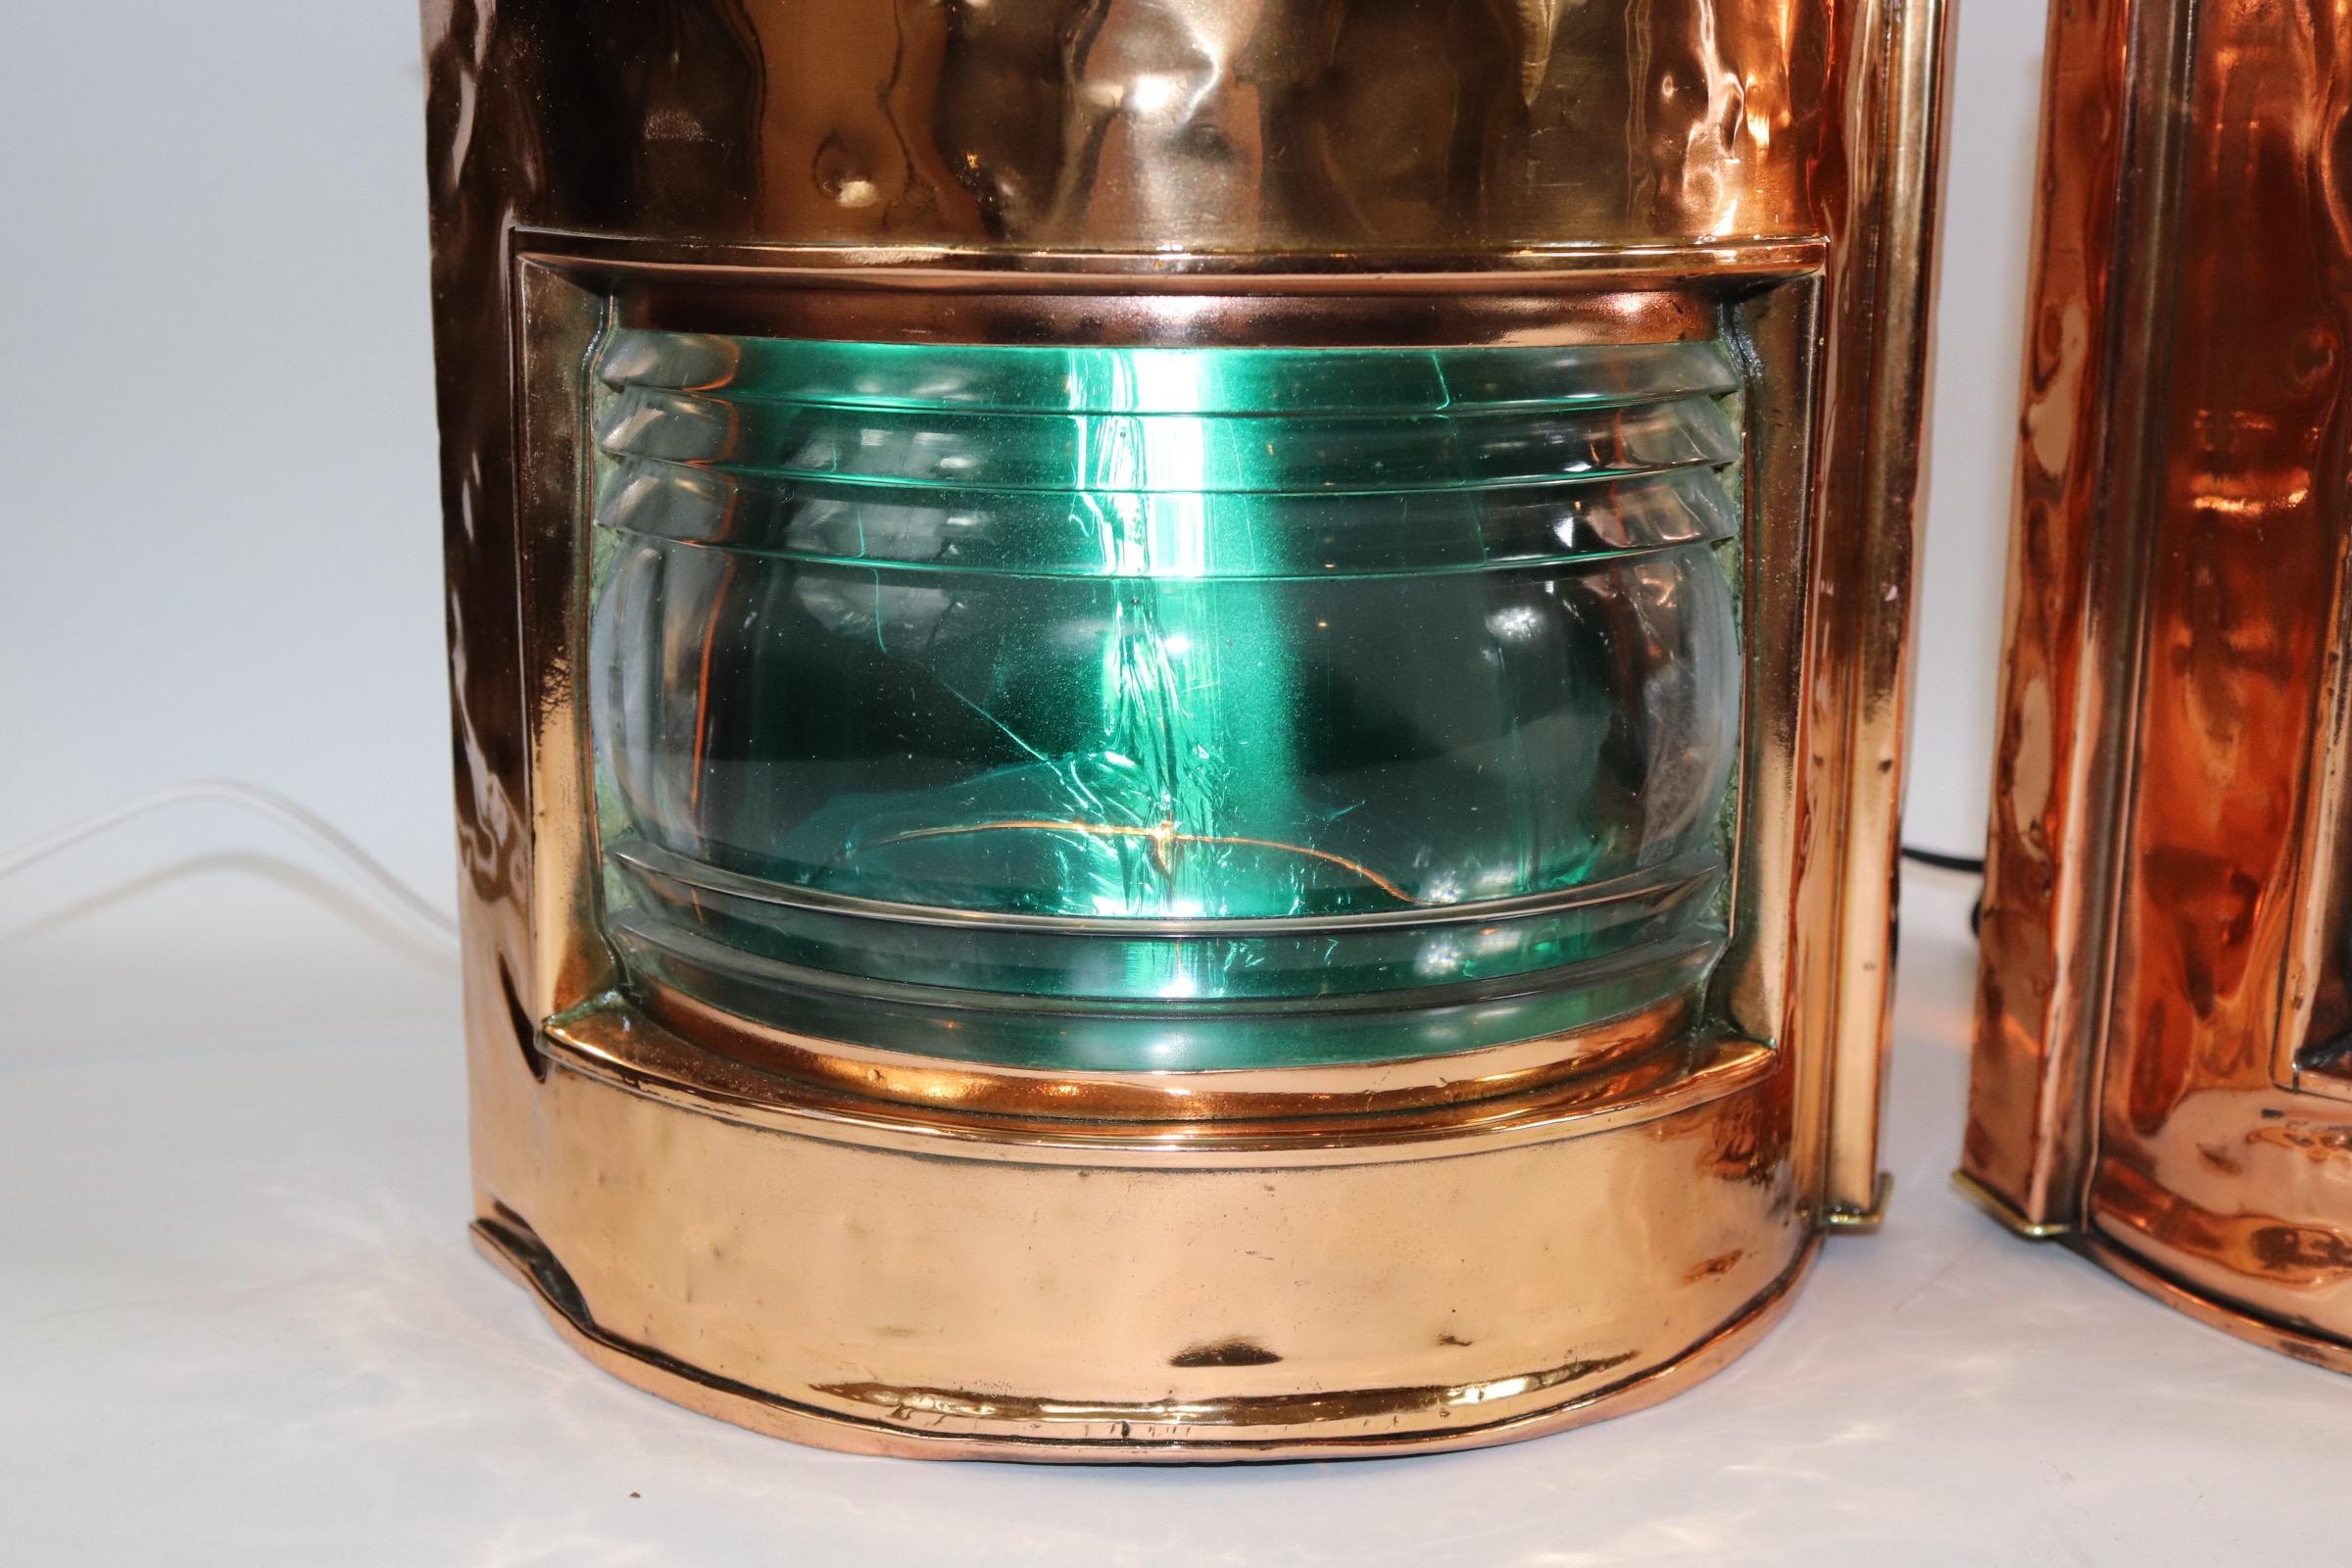 Pair of highly polished and lacquered copper port and starboard ship lanterns with brass makers badges from Telford Grier and Mackay. Dated 1916 on rear door. Clear glass fresnel lenses with removable red and green filters. The green filter is